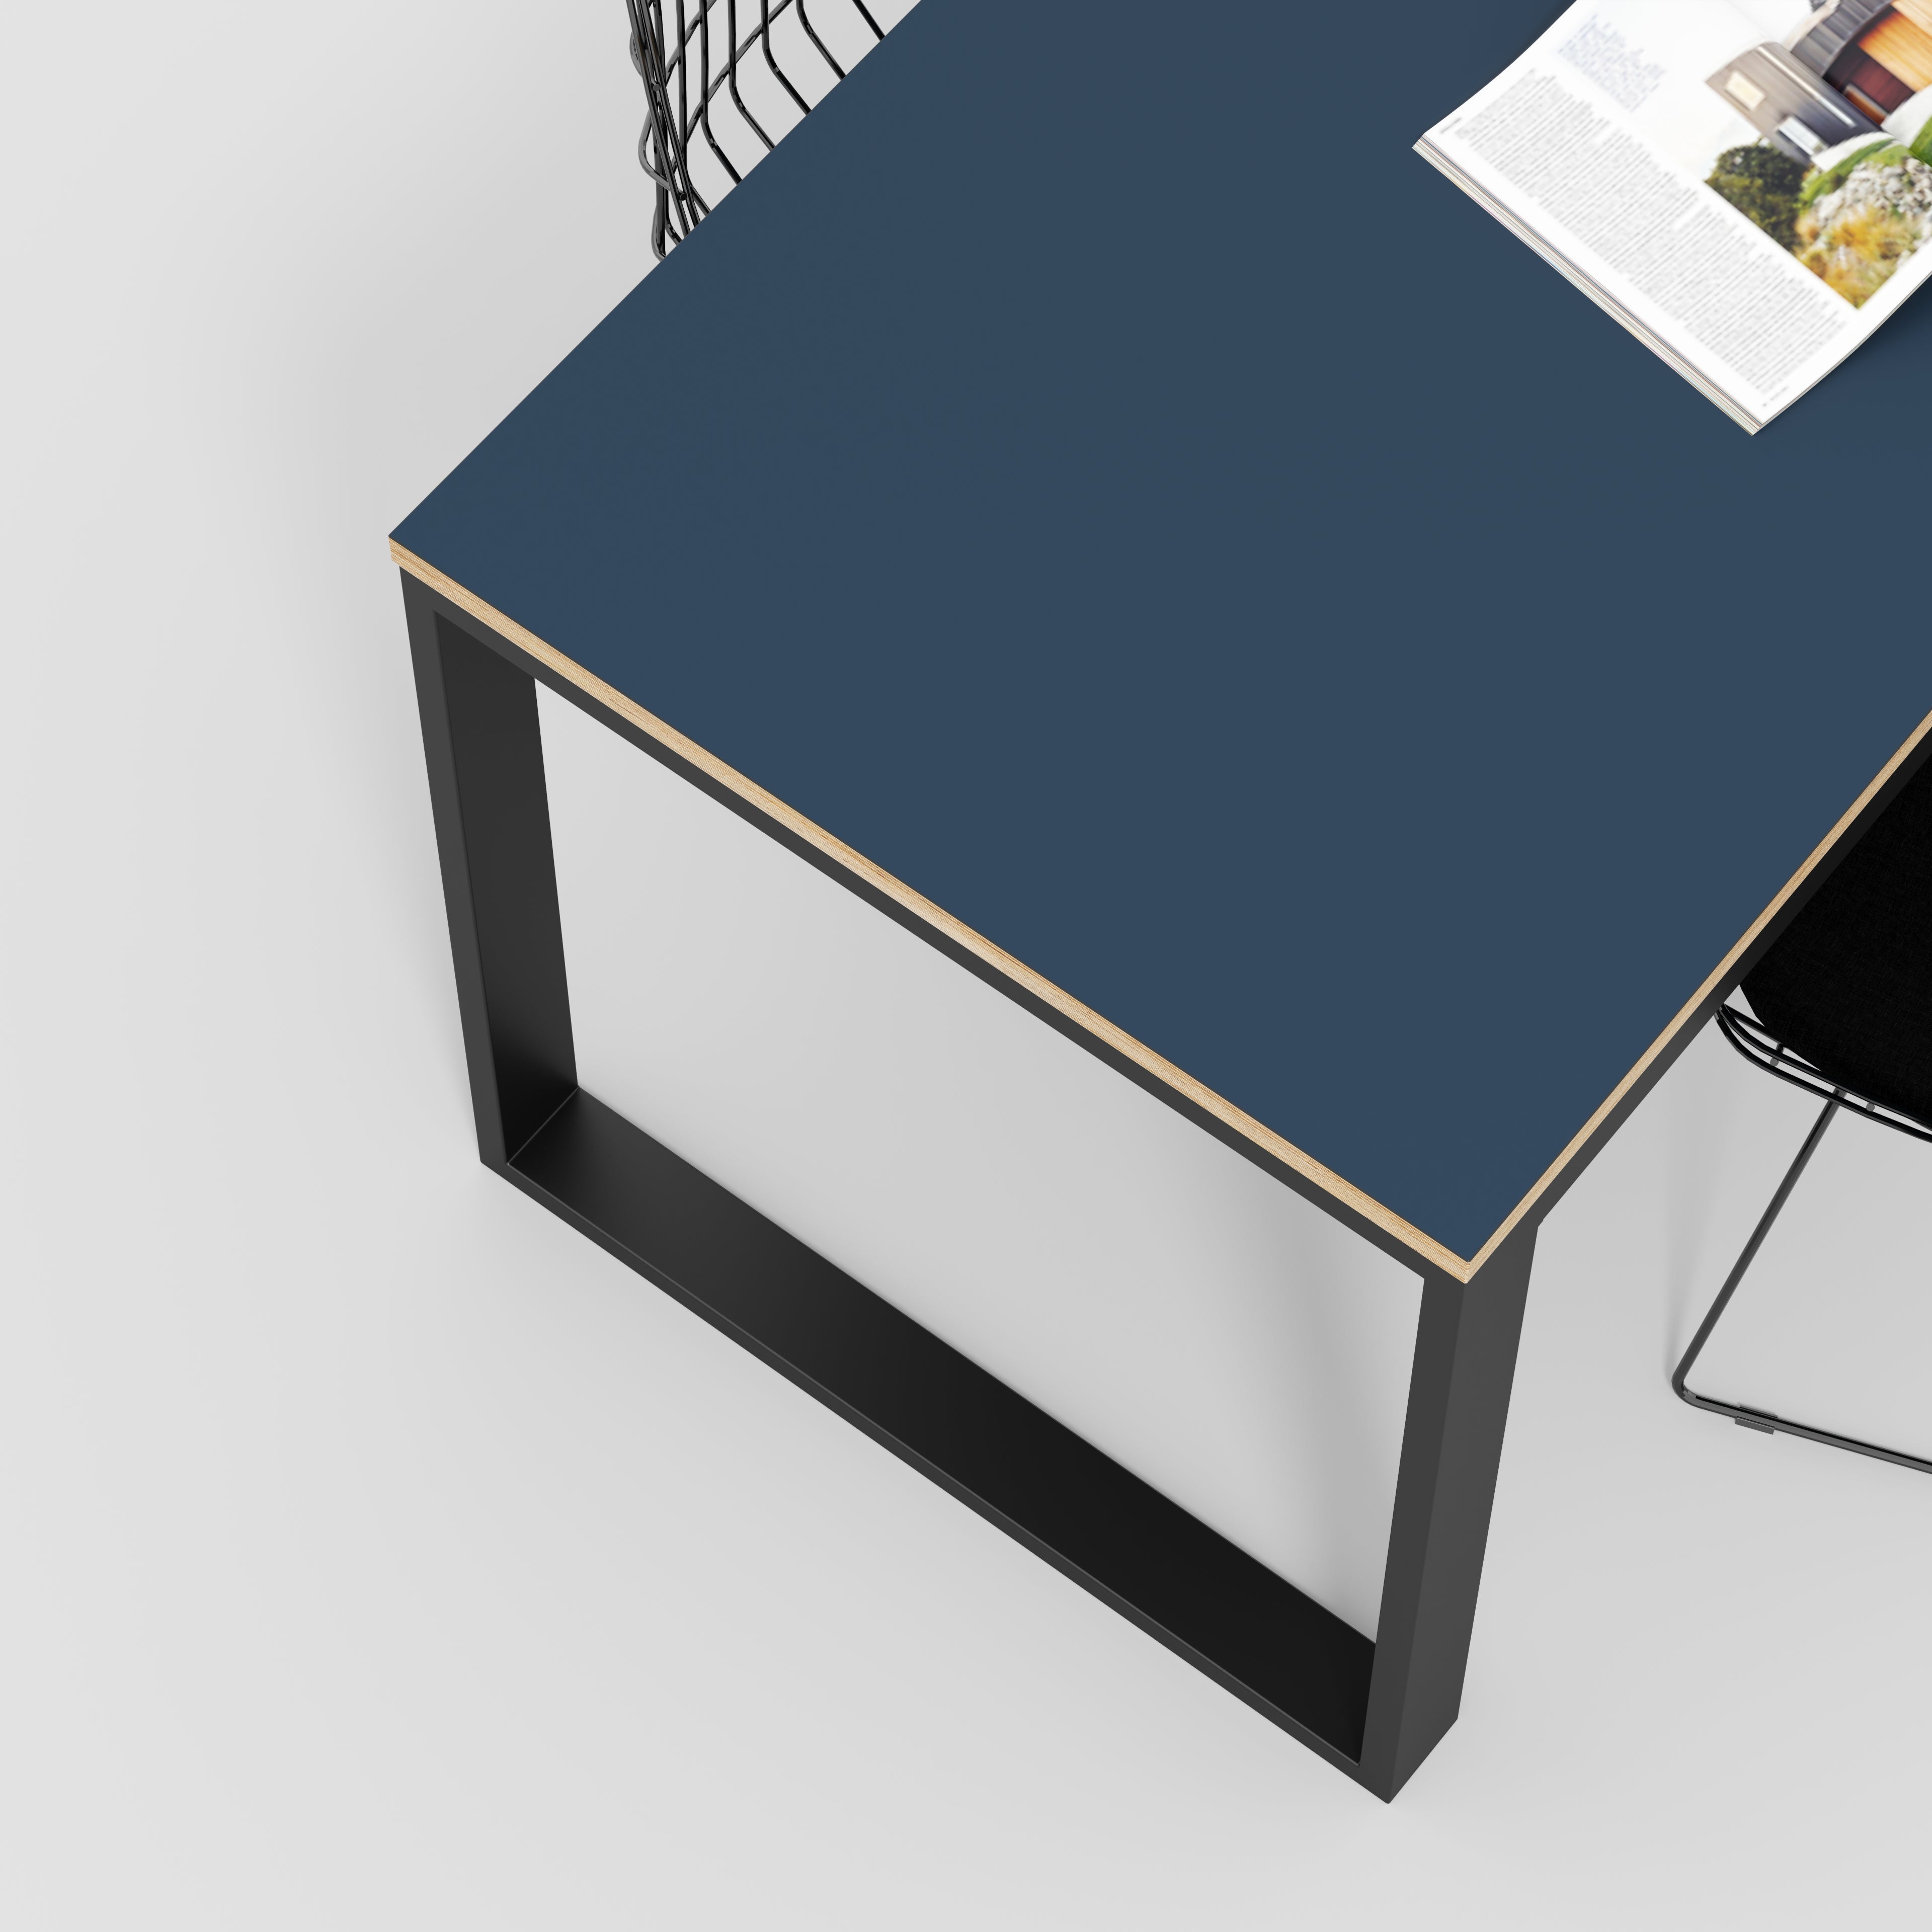 Table with Black Industrial Frame - Formica Night Sea Blue - 1200(w) x 745(d) x 735(h)